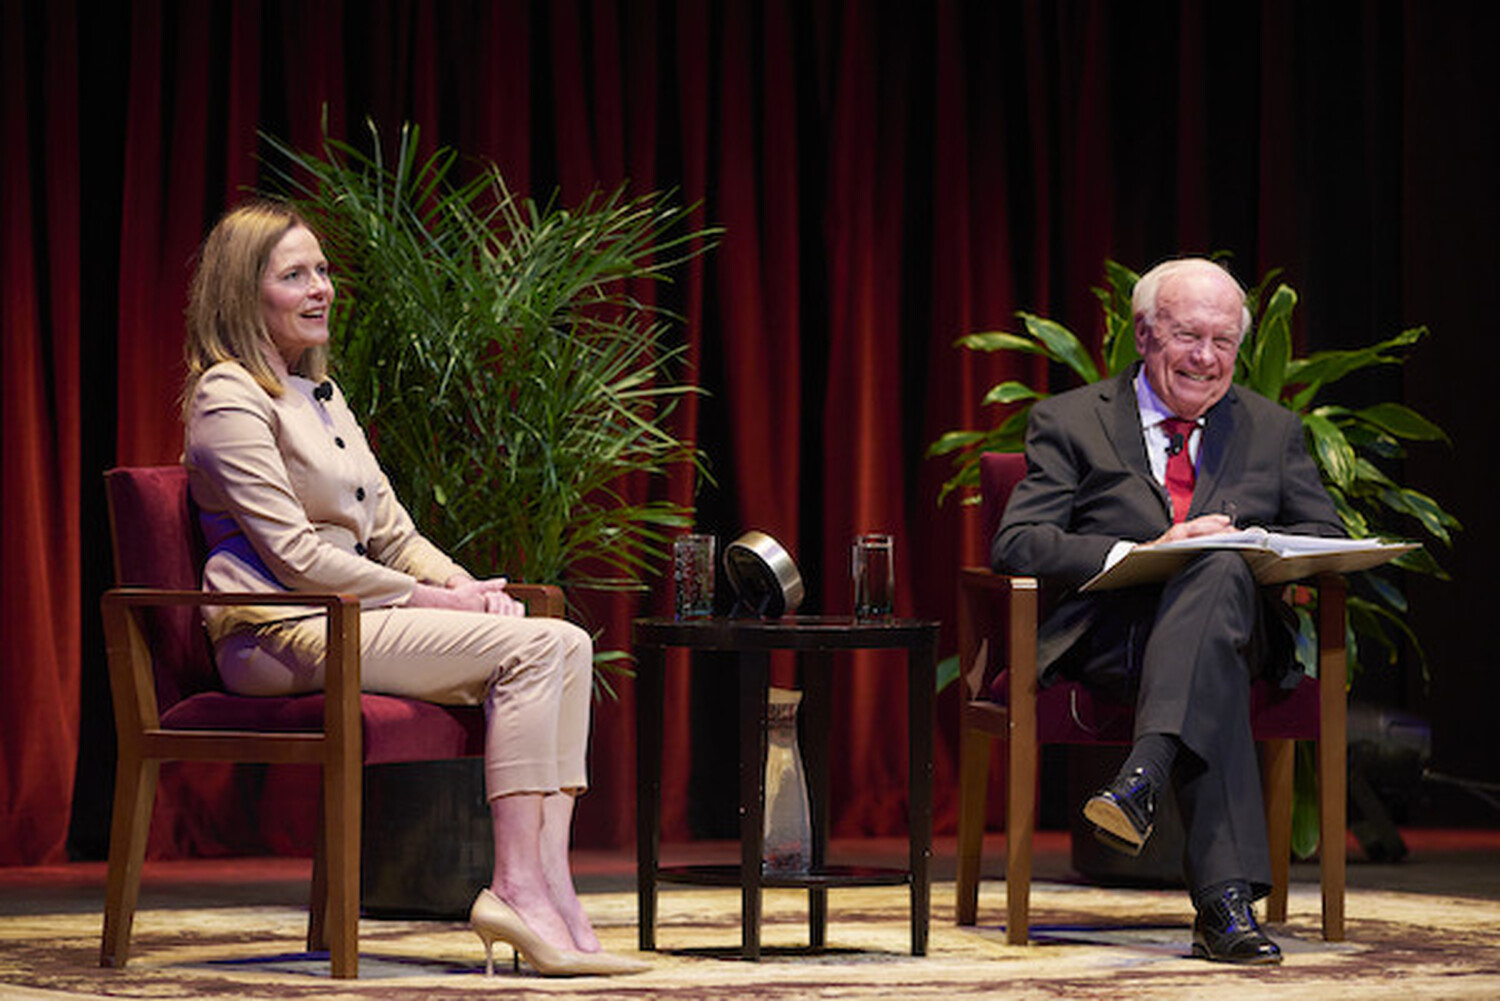 The 2023 Robert A. Stein ’61 Lecture with Justice Amy Coney Barrett